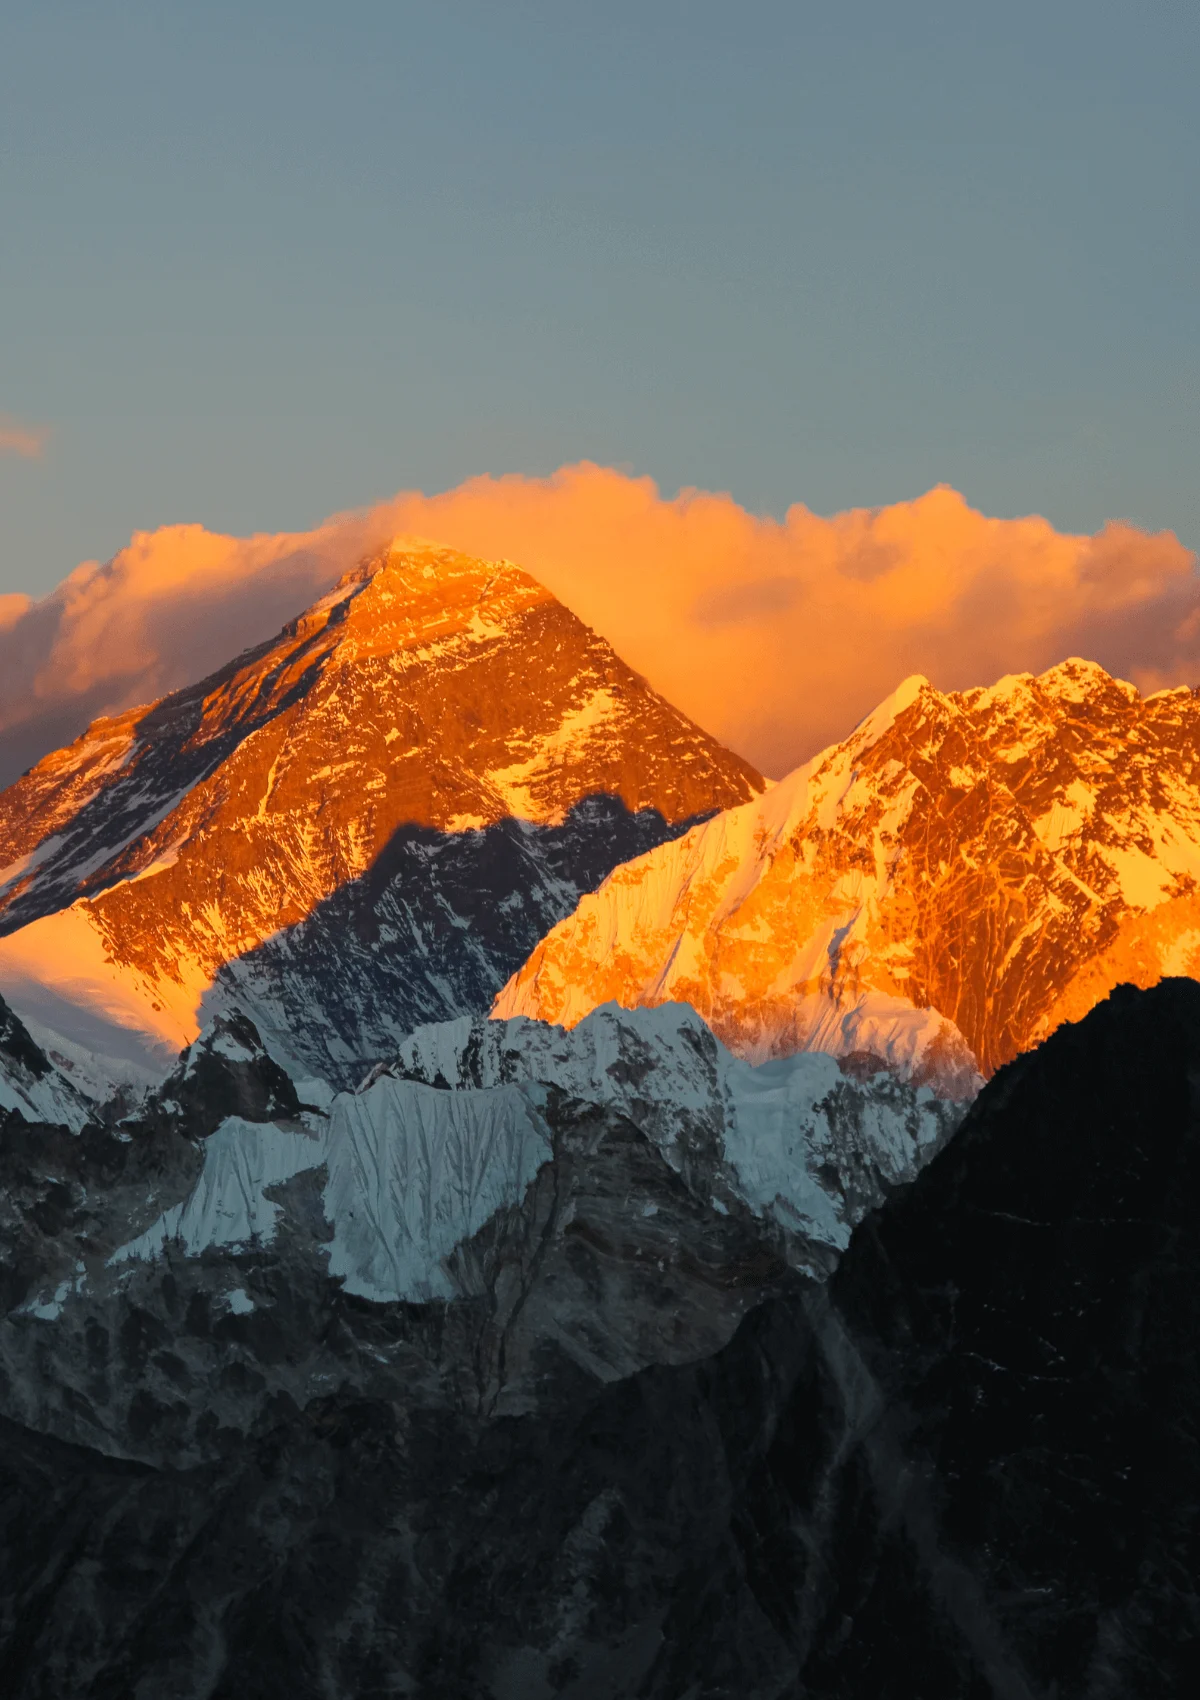 The Himalayas in India are world-famous, inviting trekkers and climbers from everywhere